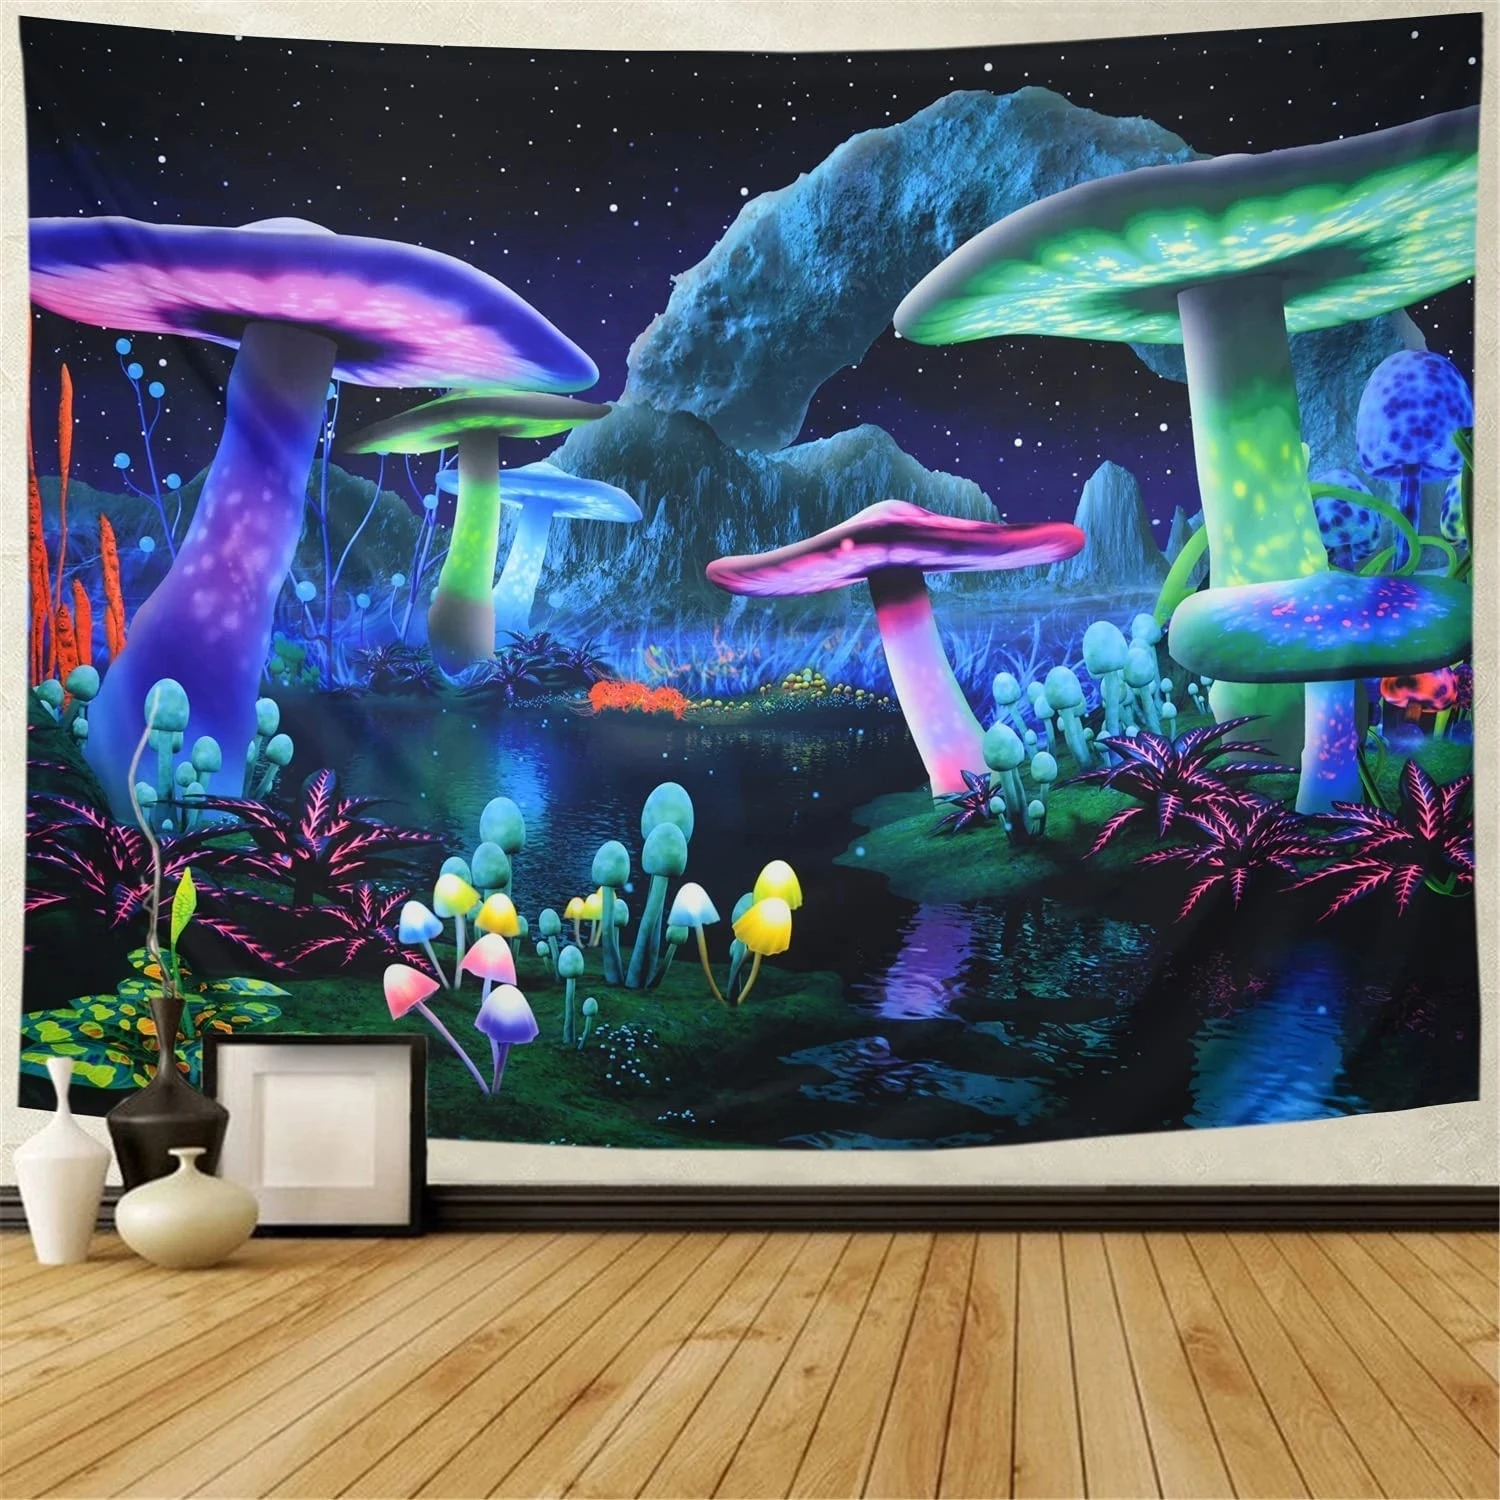 

Psychedelic Mushroom Tapestry Fantasy Plant Tapestry Galaxy Space Tapestry Starry Night Tapestry Wall Hanging